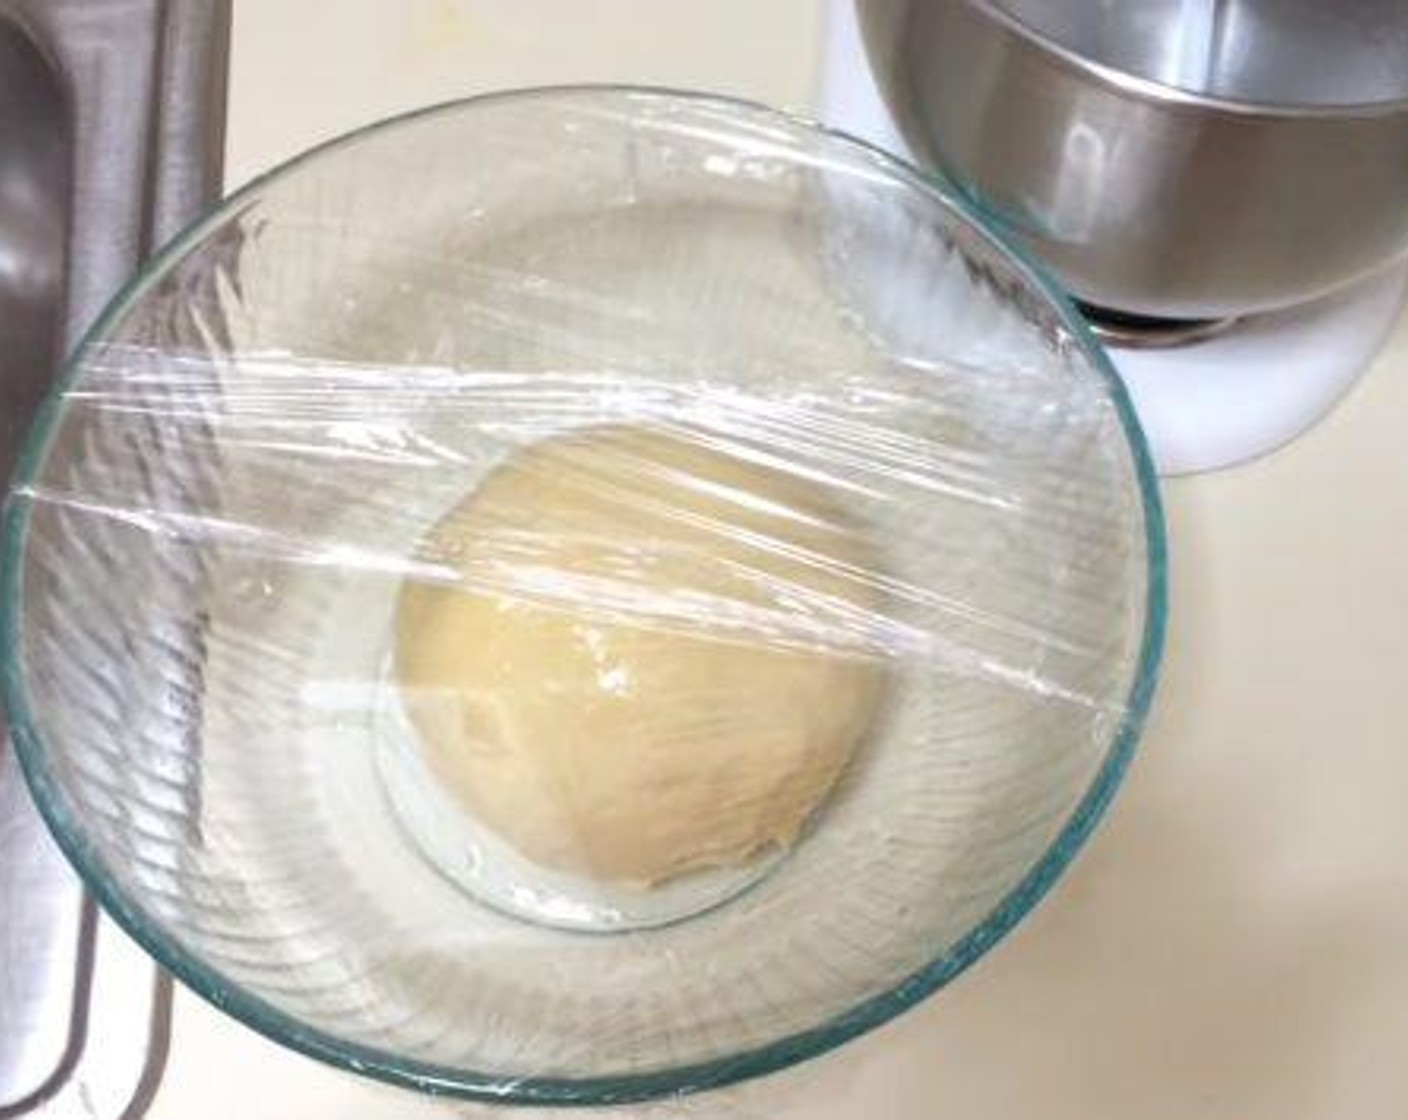 step 3 Take your dough, form it into a ball shape and place it into a greased bowl. Cover it with a plastic wrap, and place it in a warm place for about 2 hours.